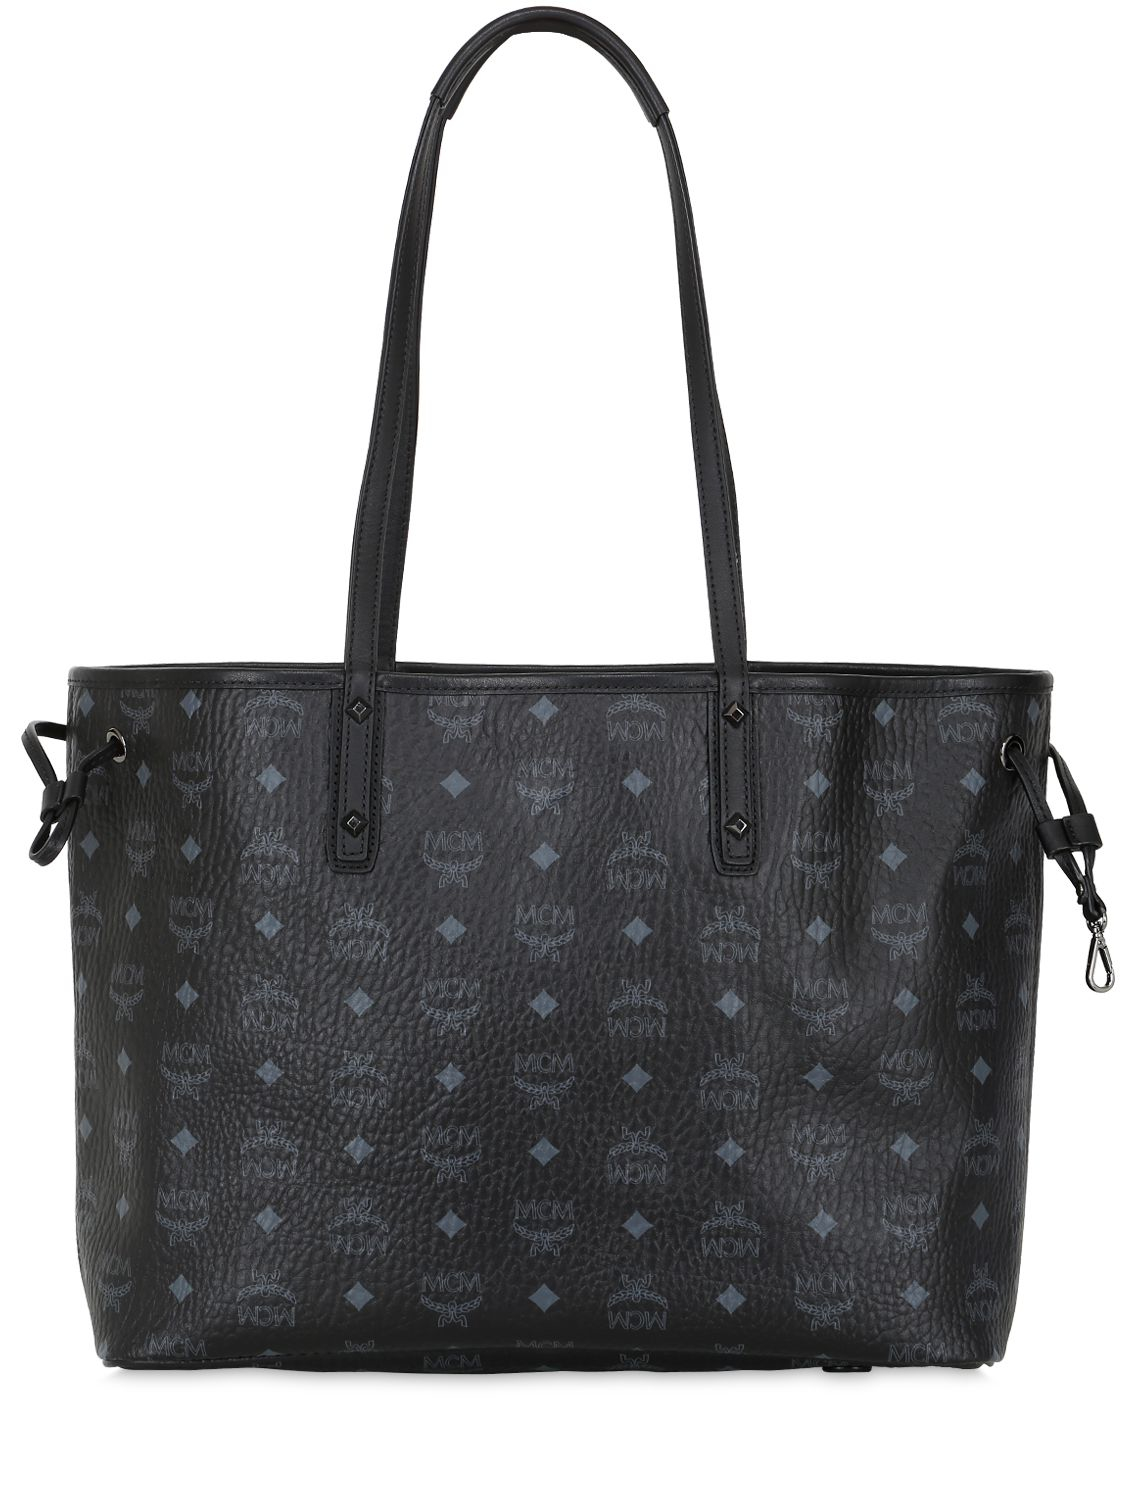 Lyst - Mcm Reversible Faux Leather Tote Bag in Black